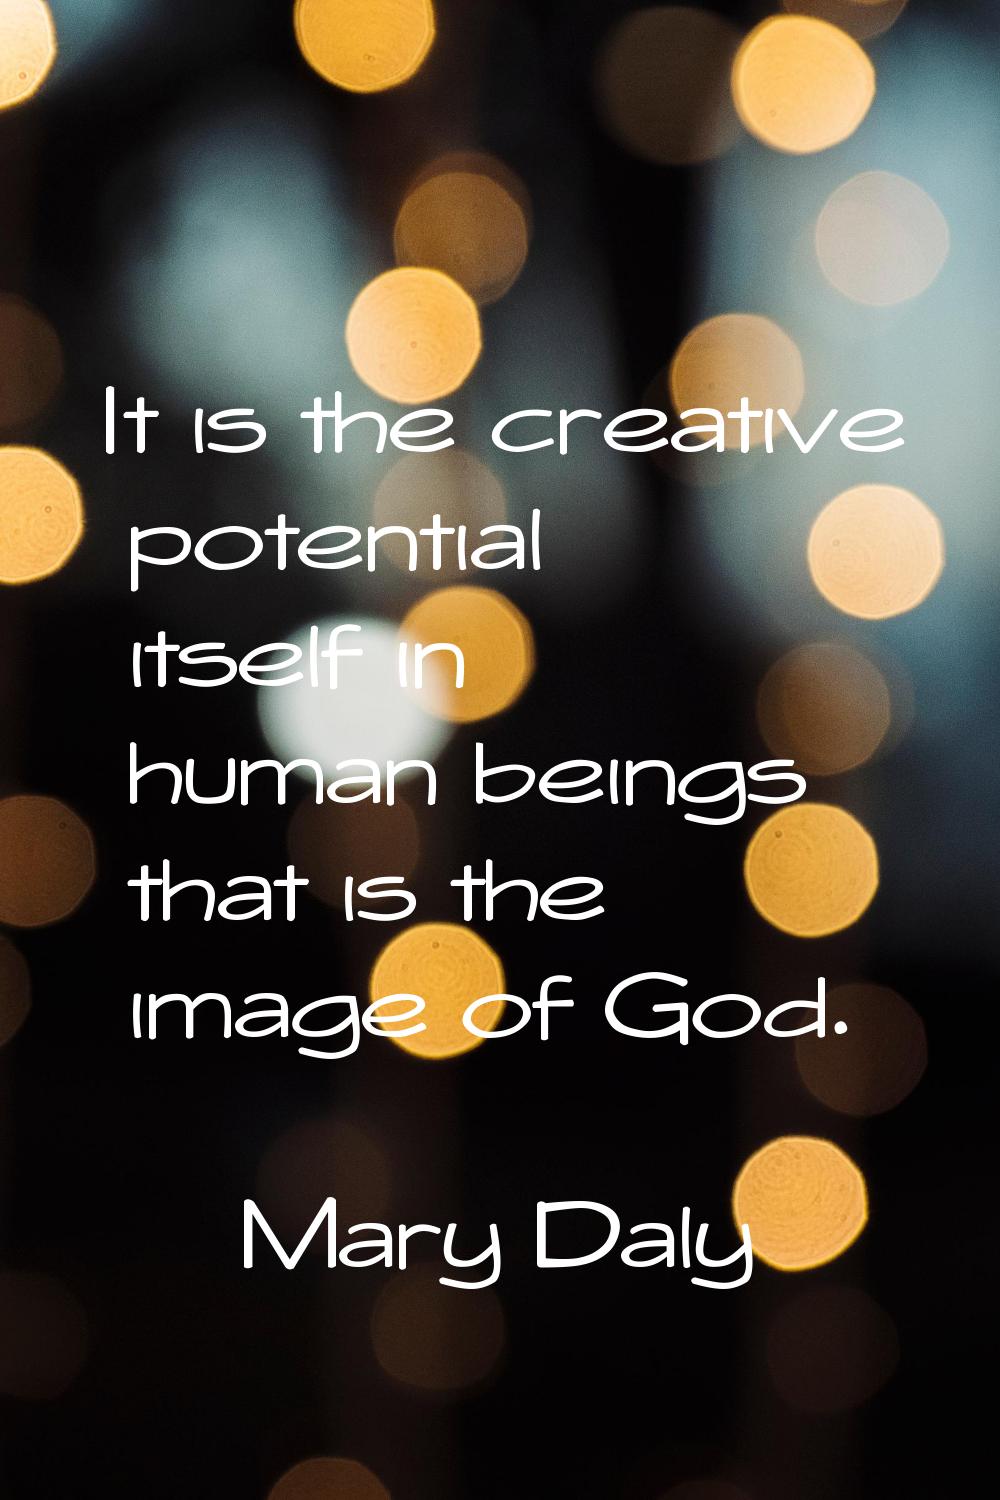 It is the creative potential itself in human beings that is the image of God.